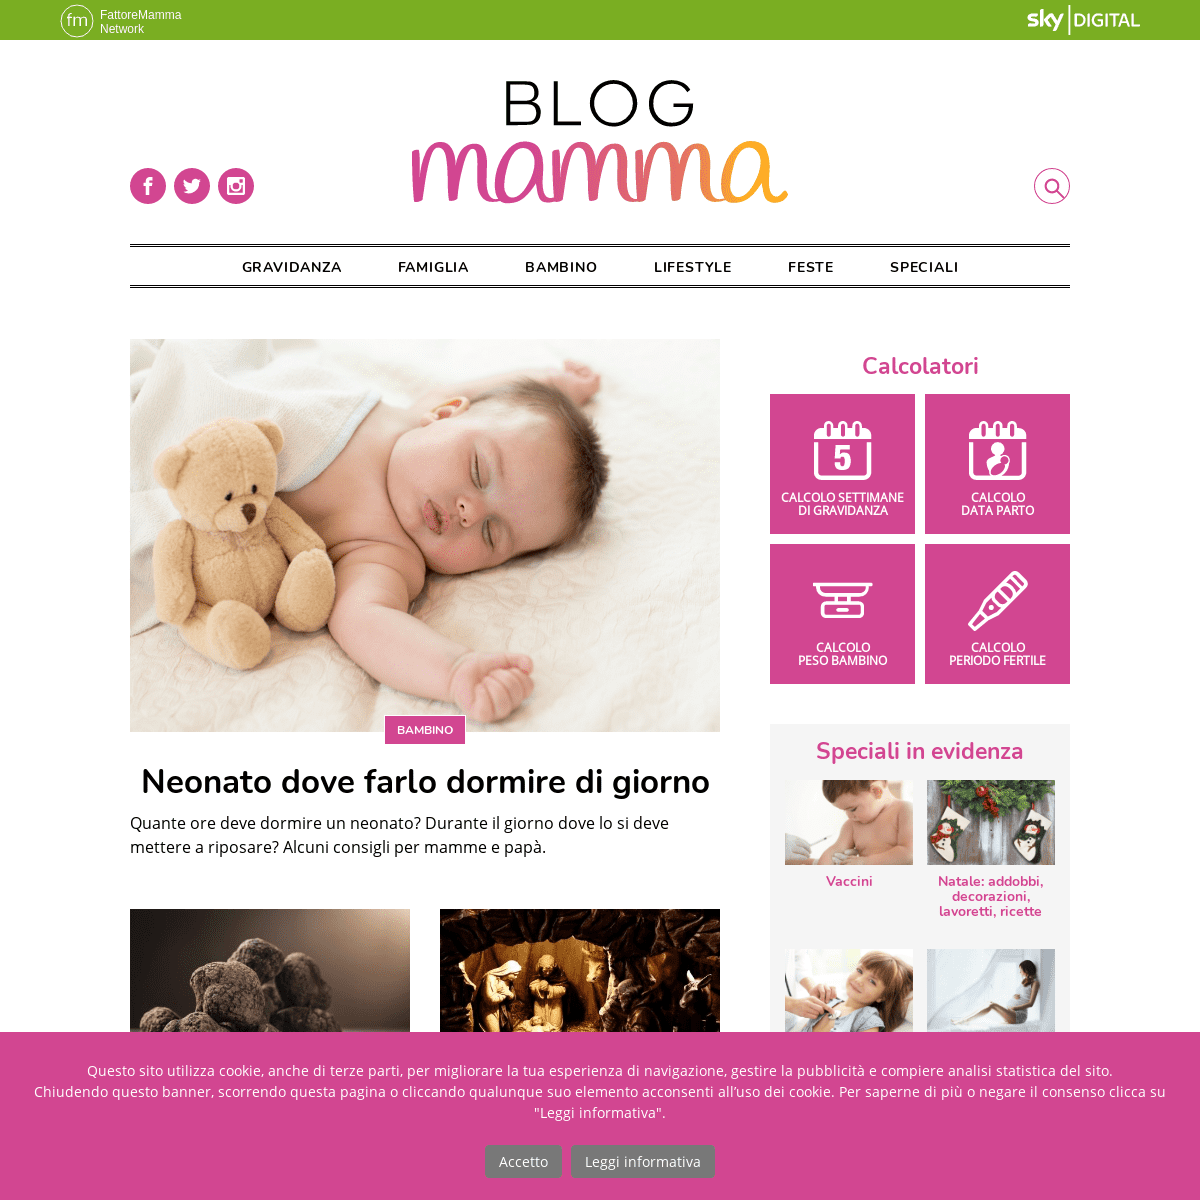 A complete backup of blogmamma.it